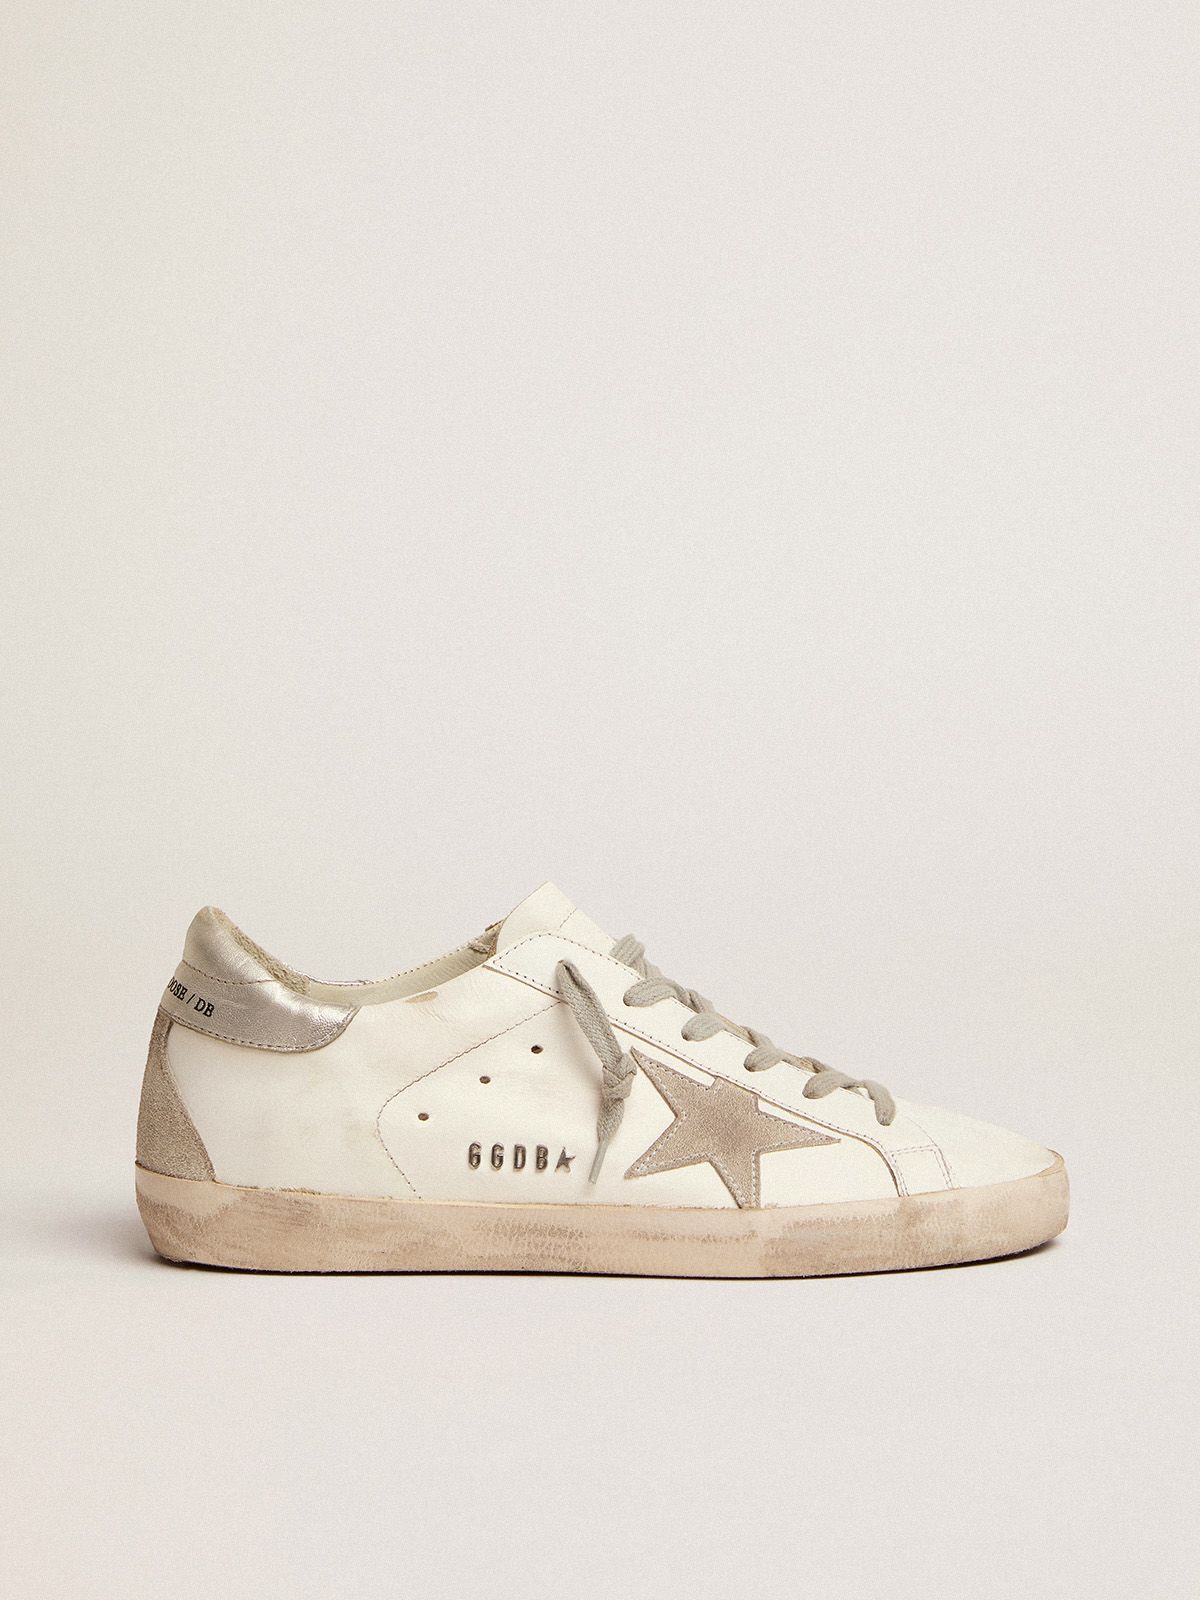 Made in Italy sneakers | Golden Goose